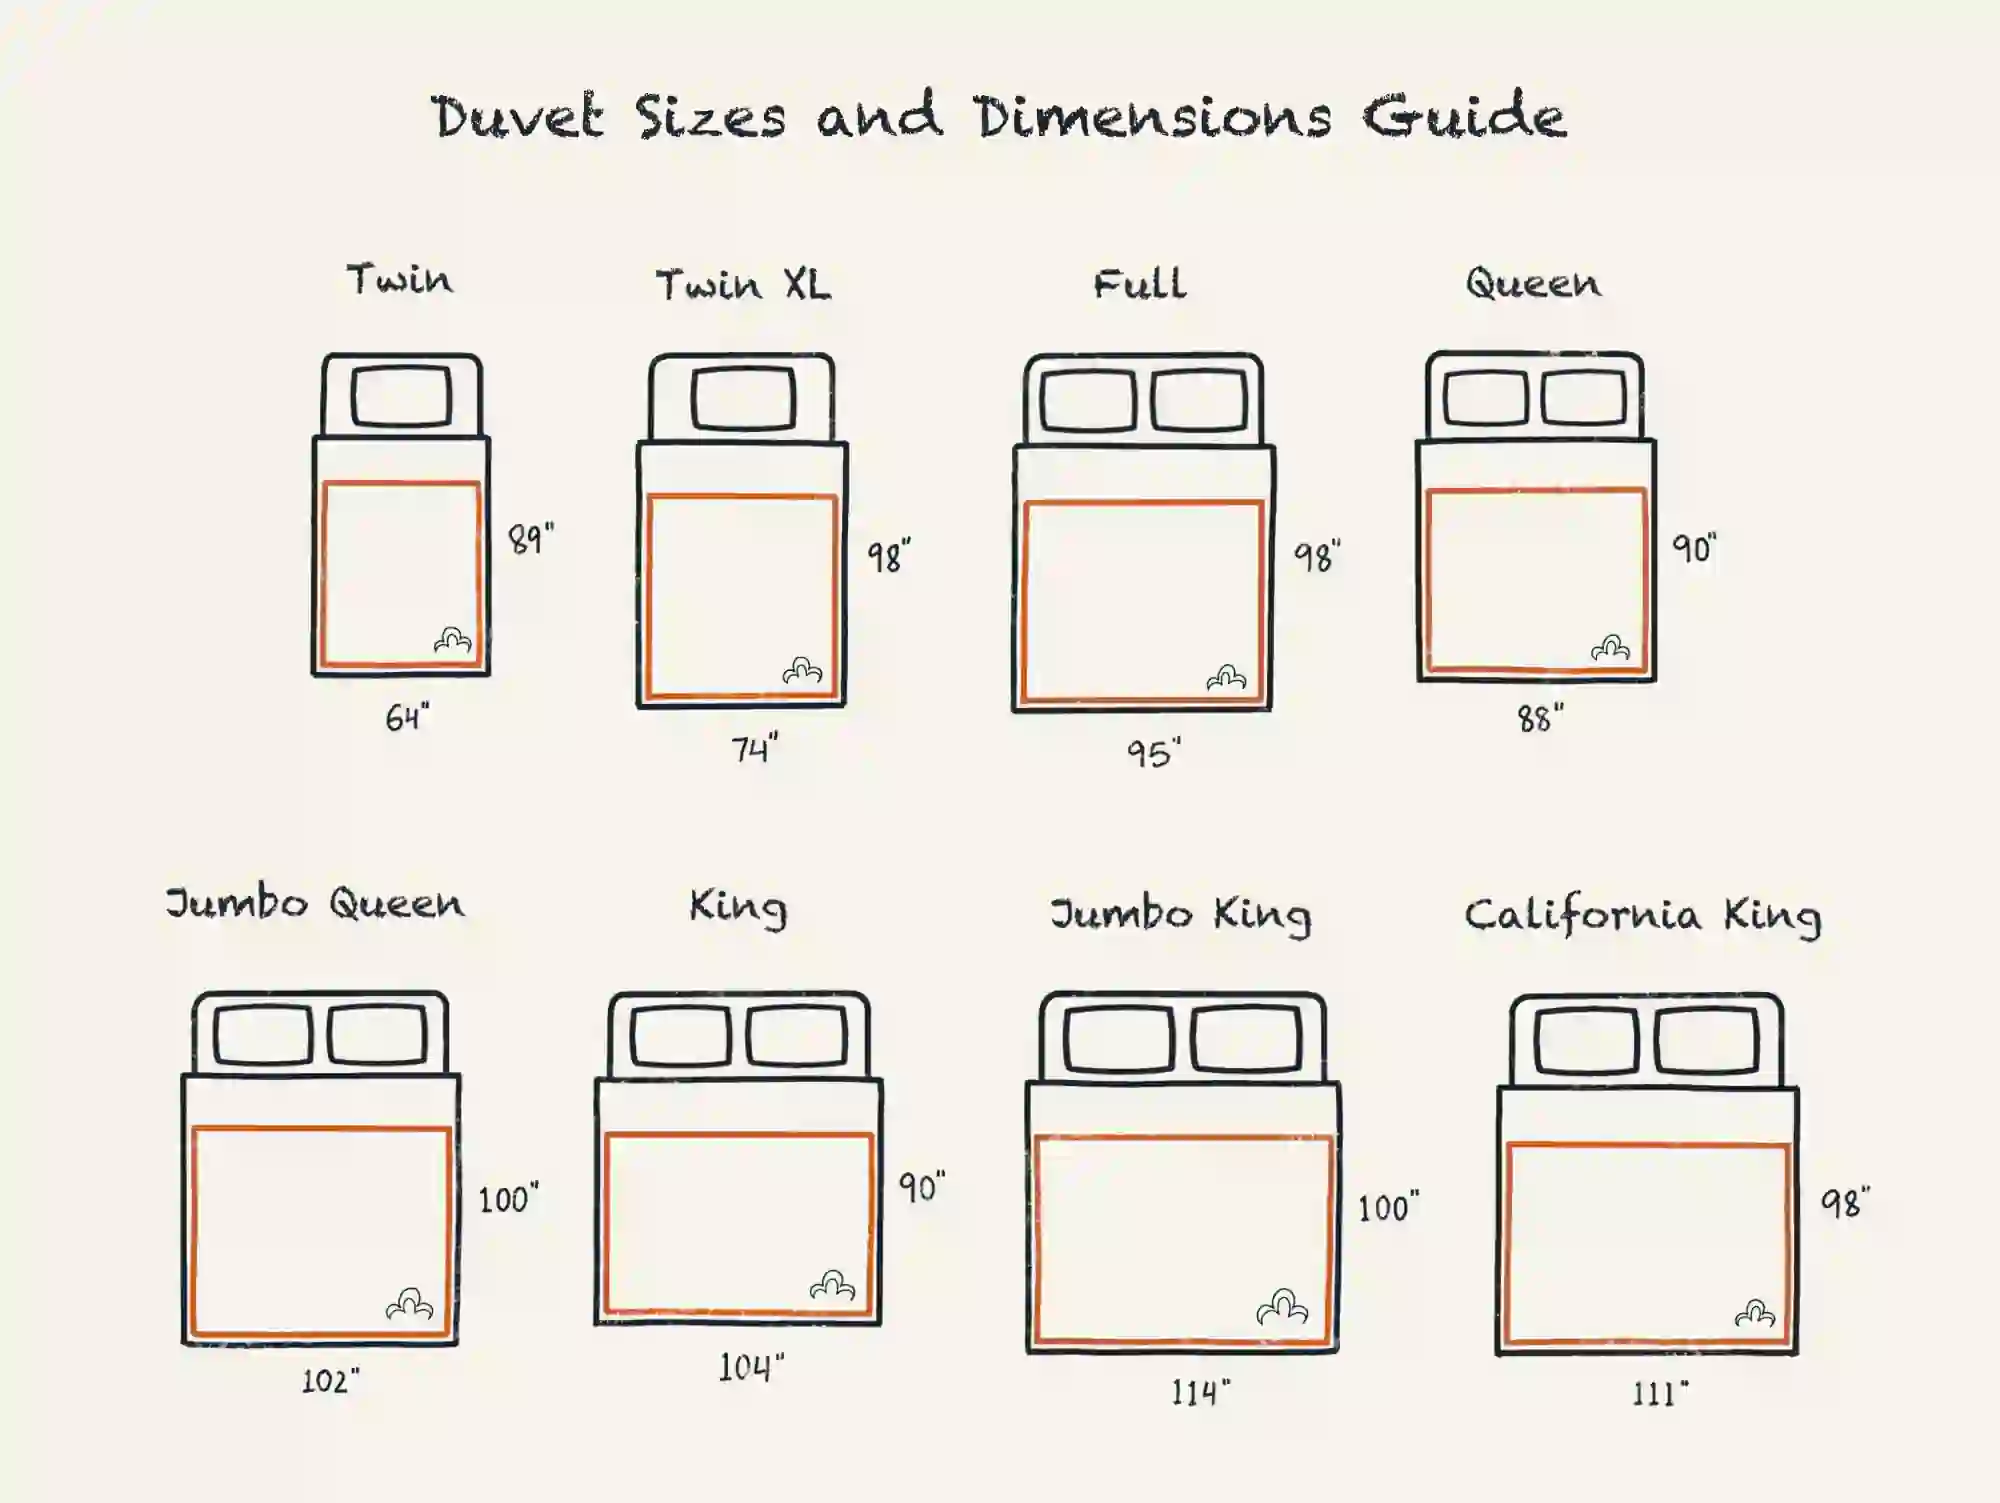 Illustration of Duvet Sizes and Dimensions Guide